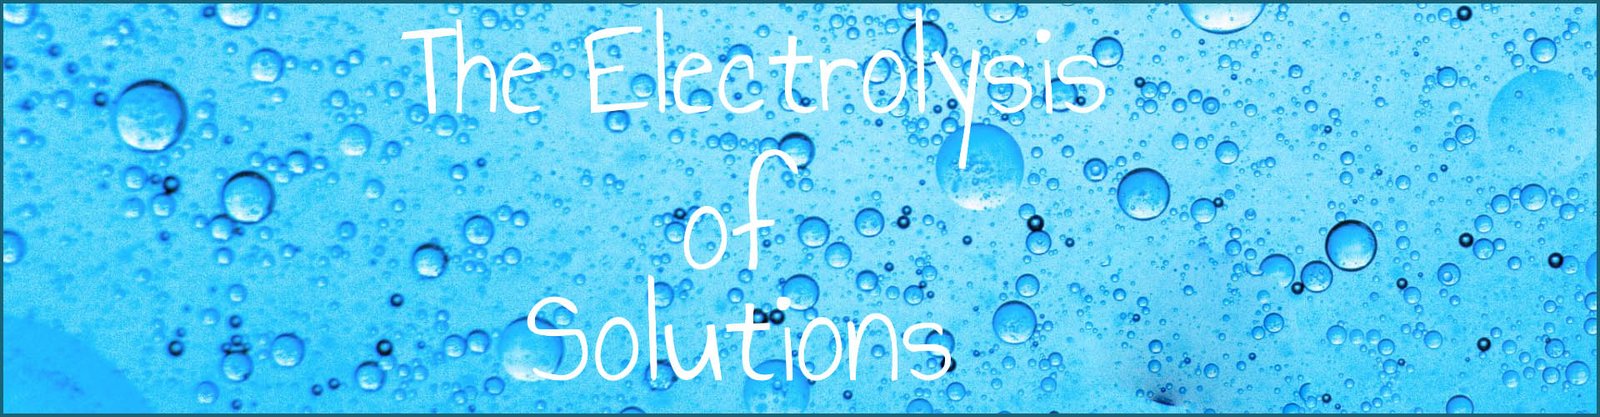 electrolysis of solutions header image.